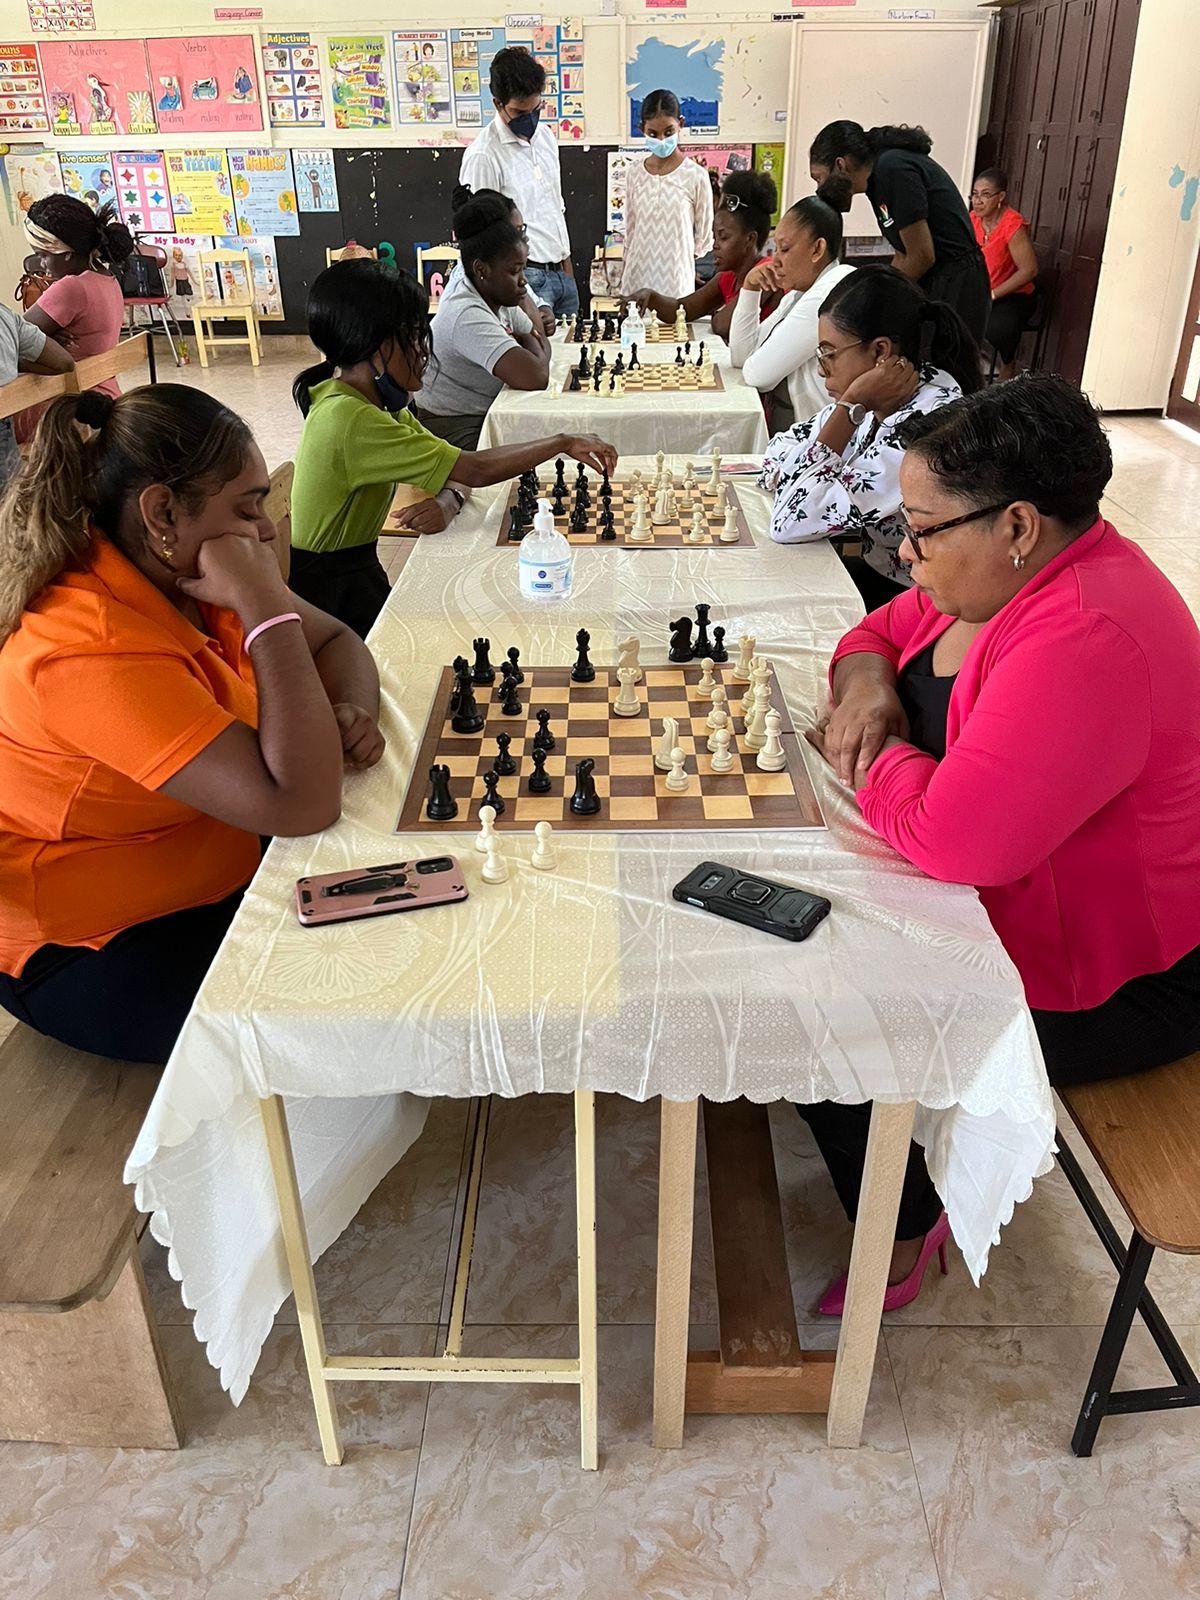 Some of the participants engaged in the tournament